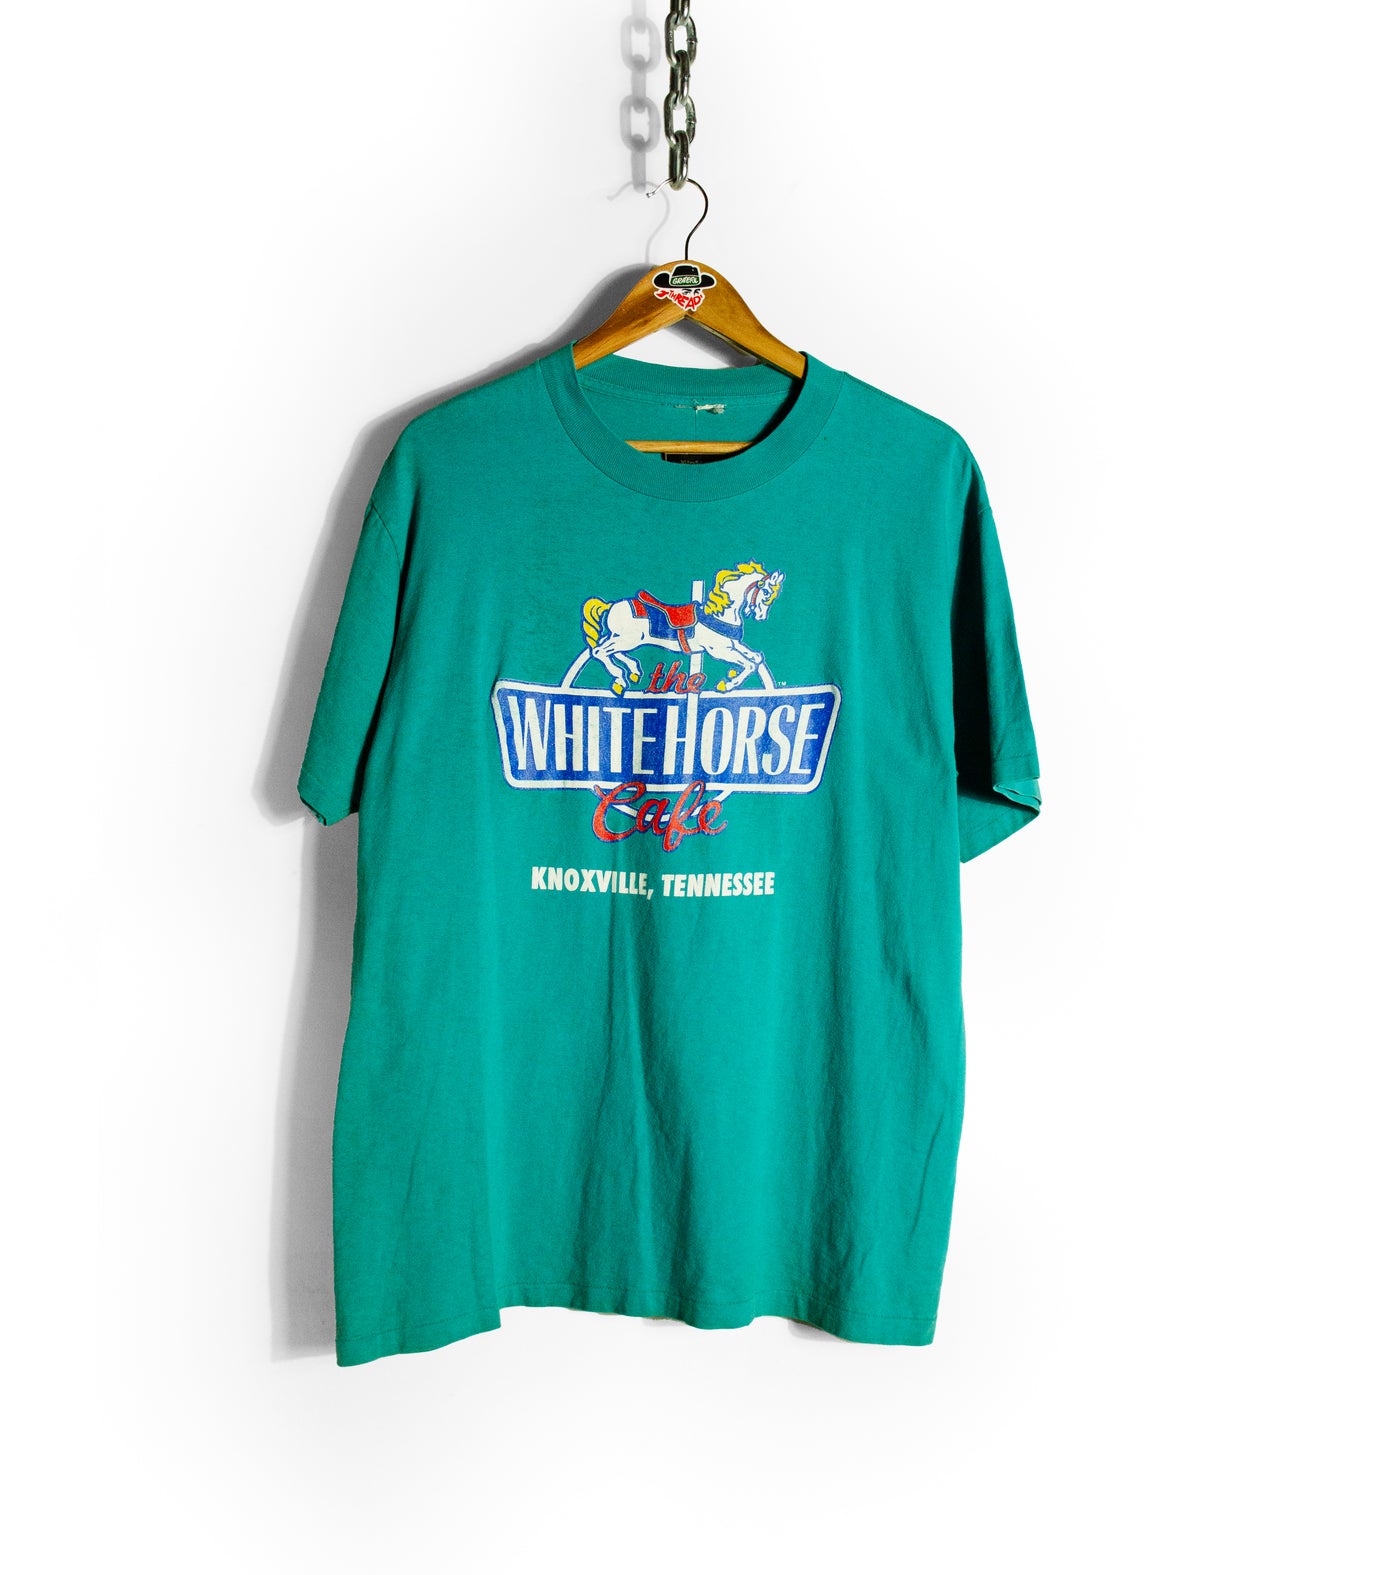 Vintage 90s 'The White Horse Cafe' Knoxville T-Shirt